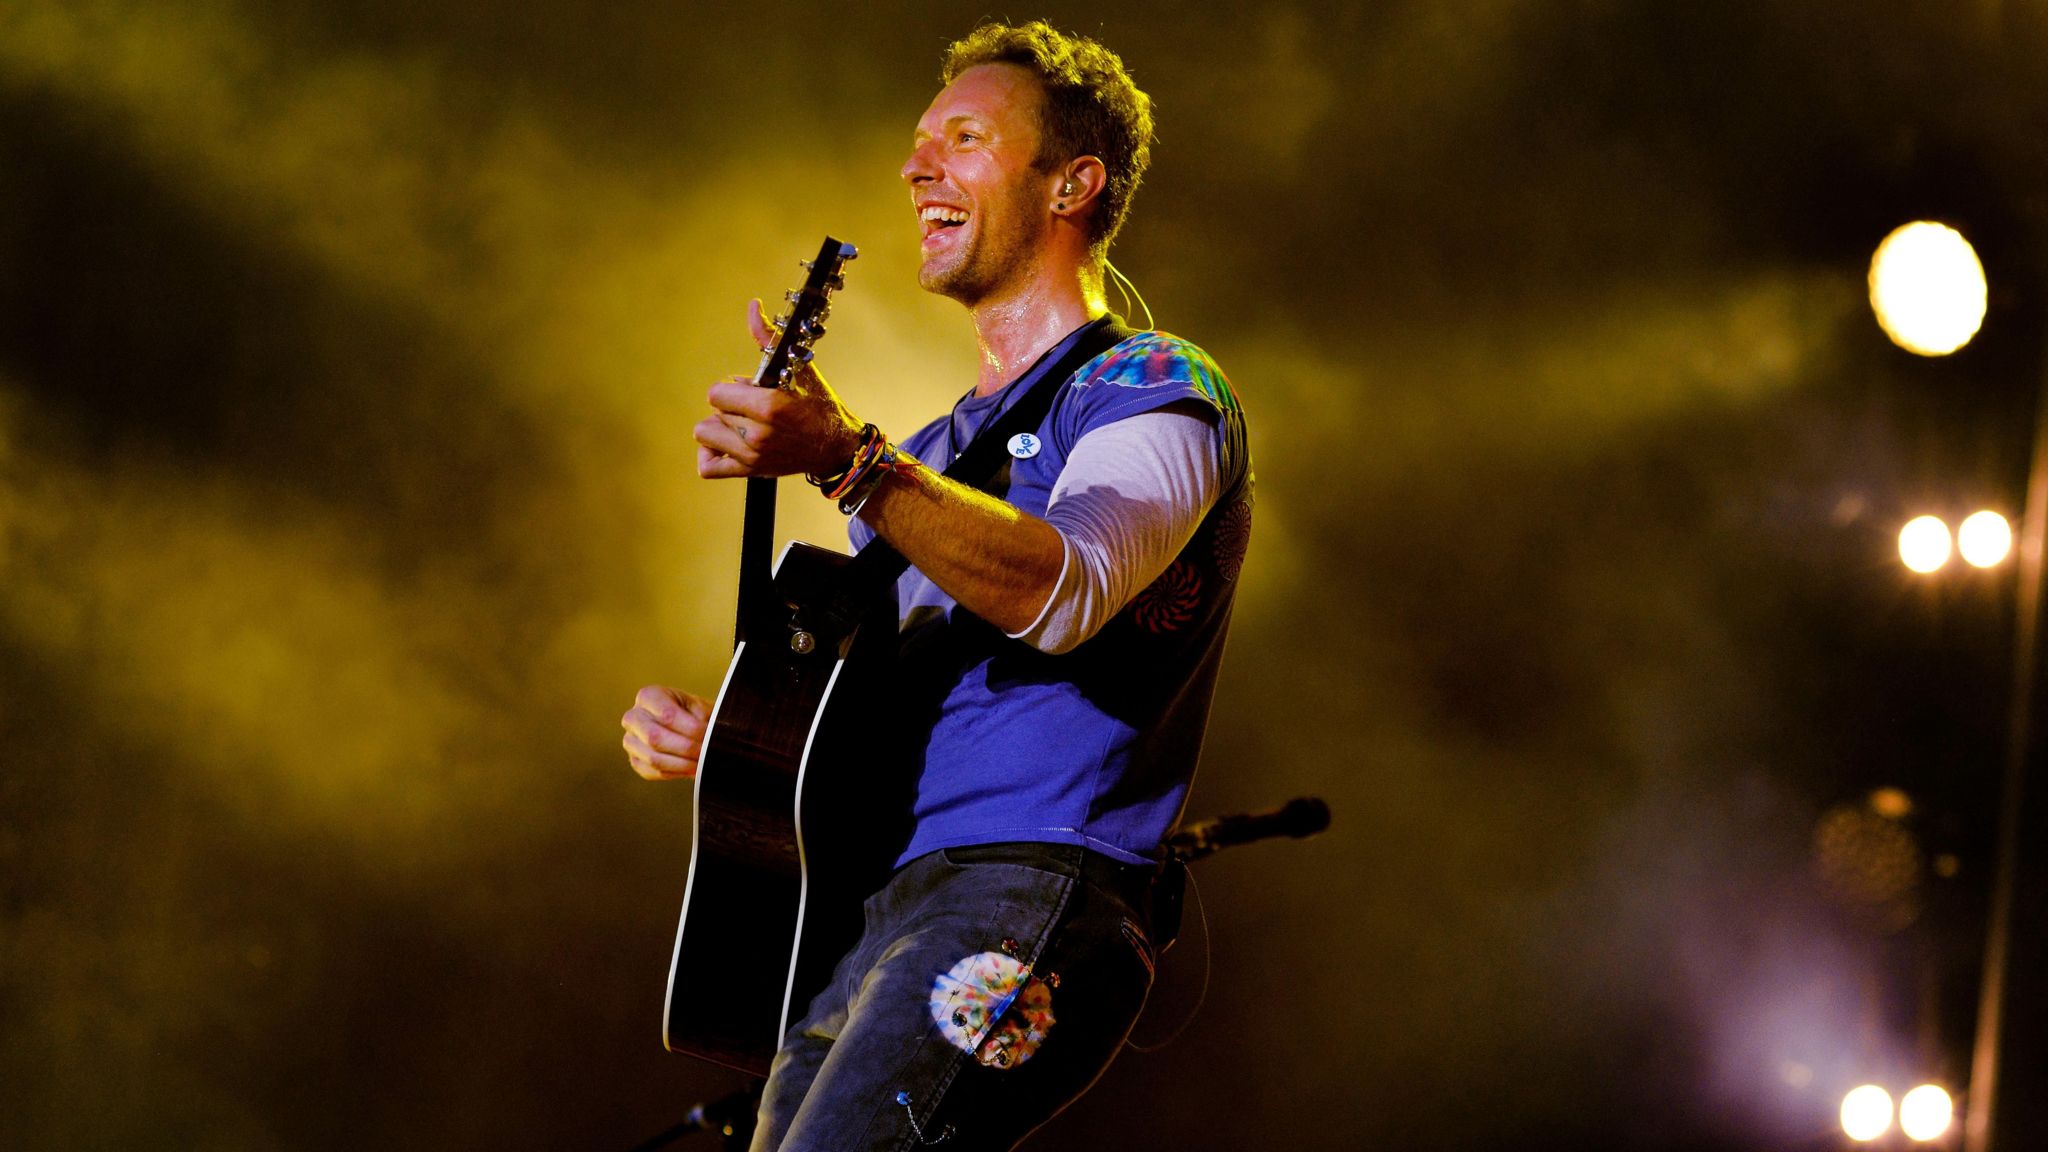 Chris Martin performing with a guitar and surrounded by yellow light